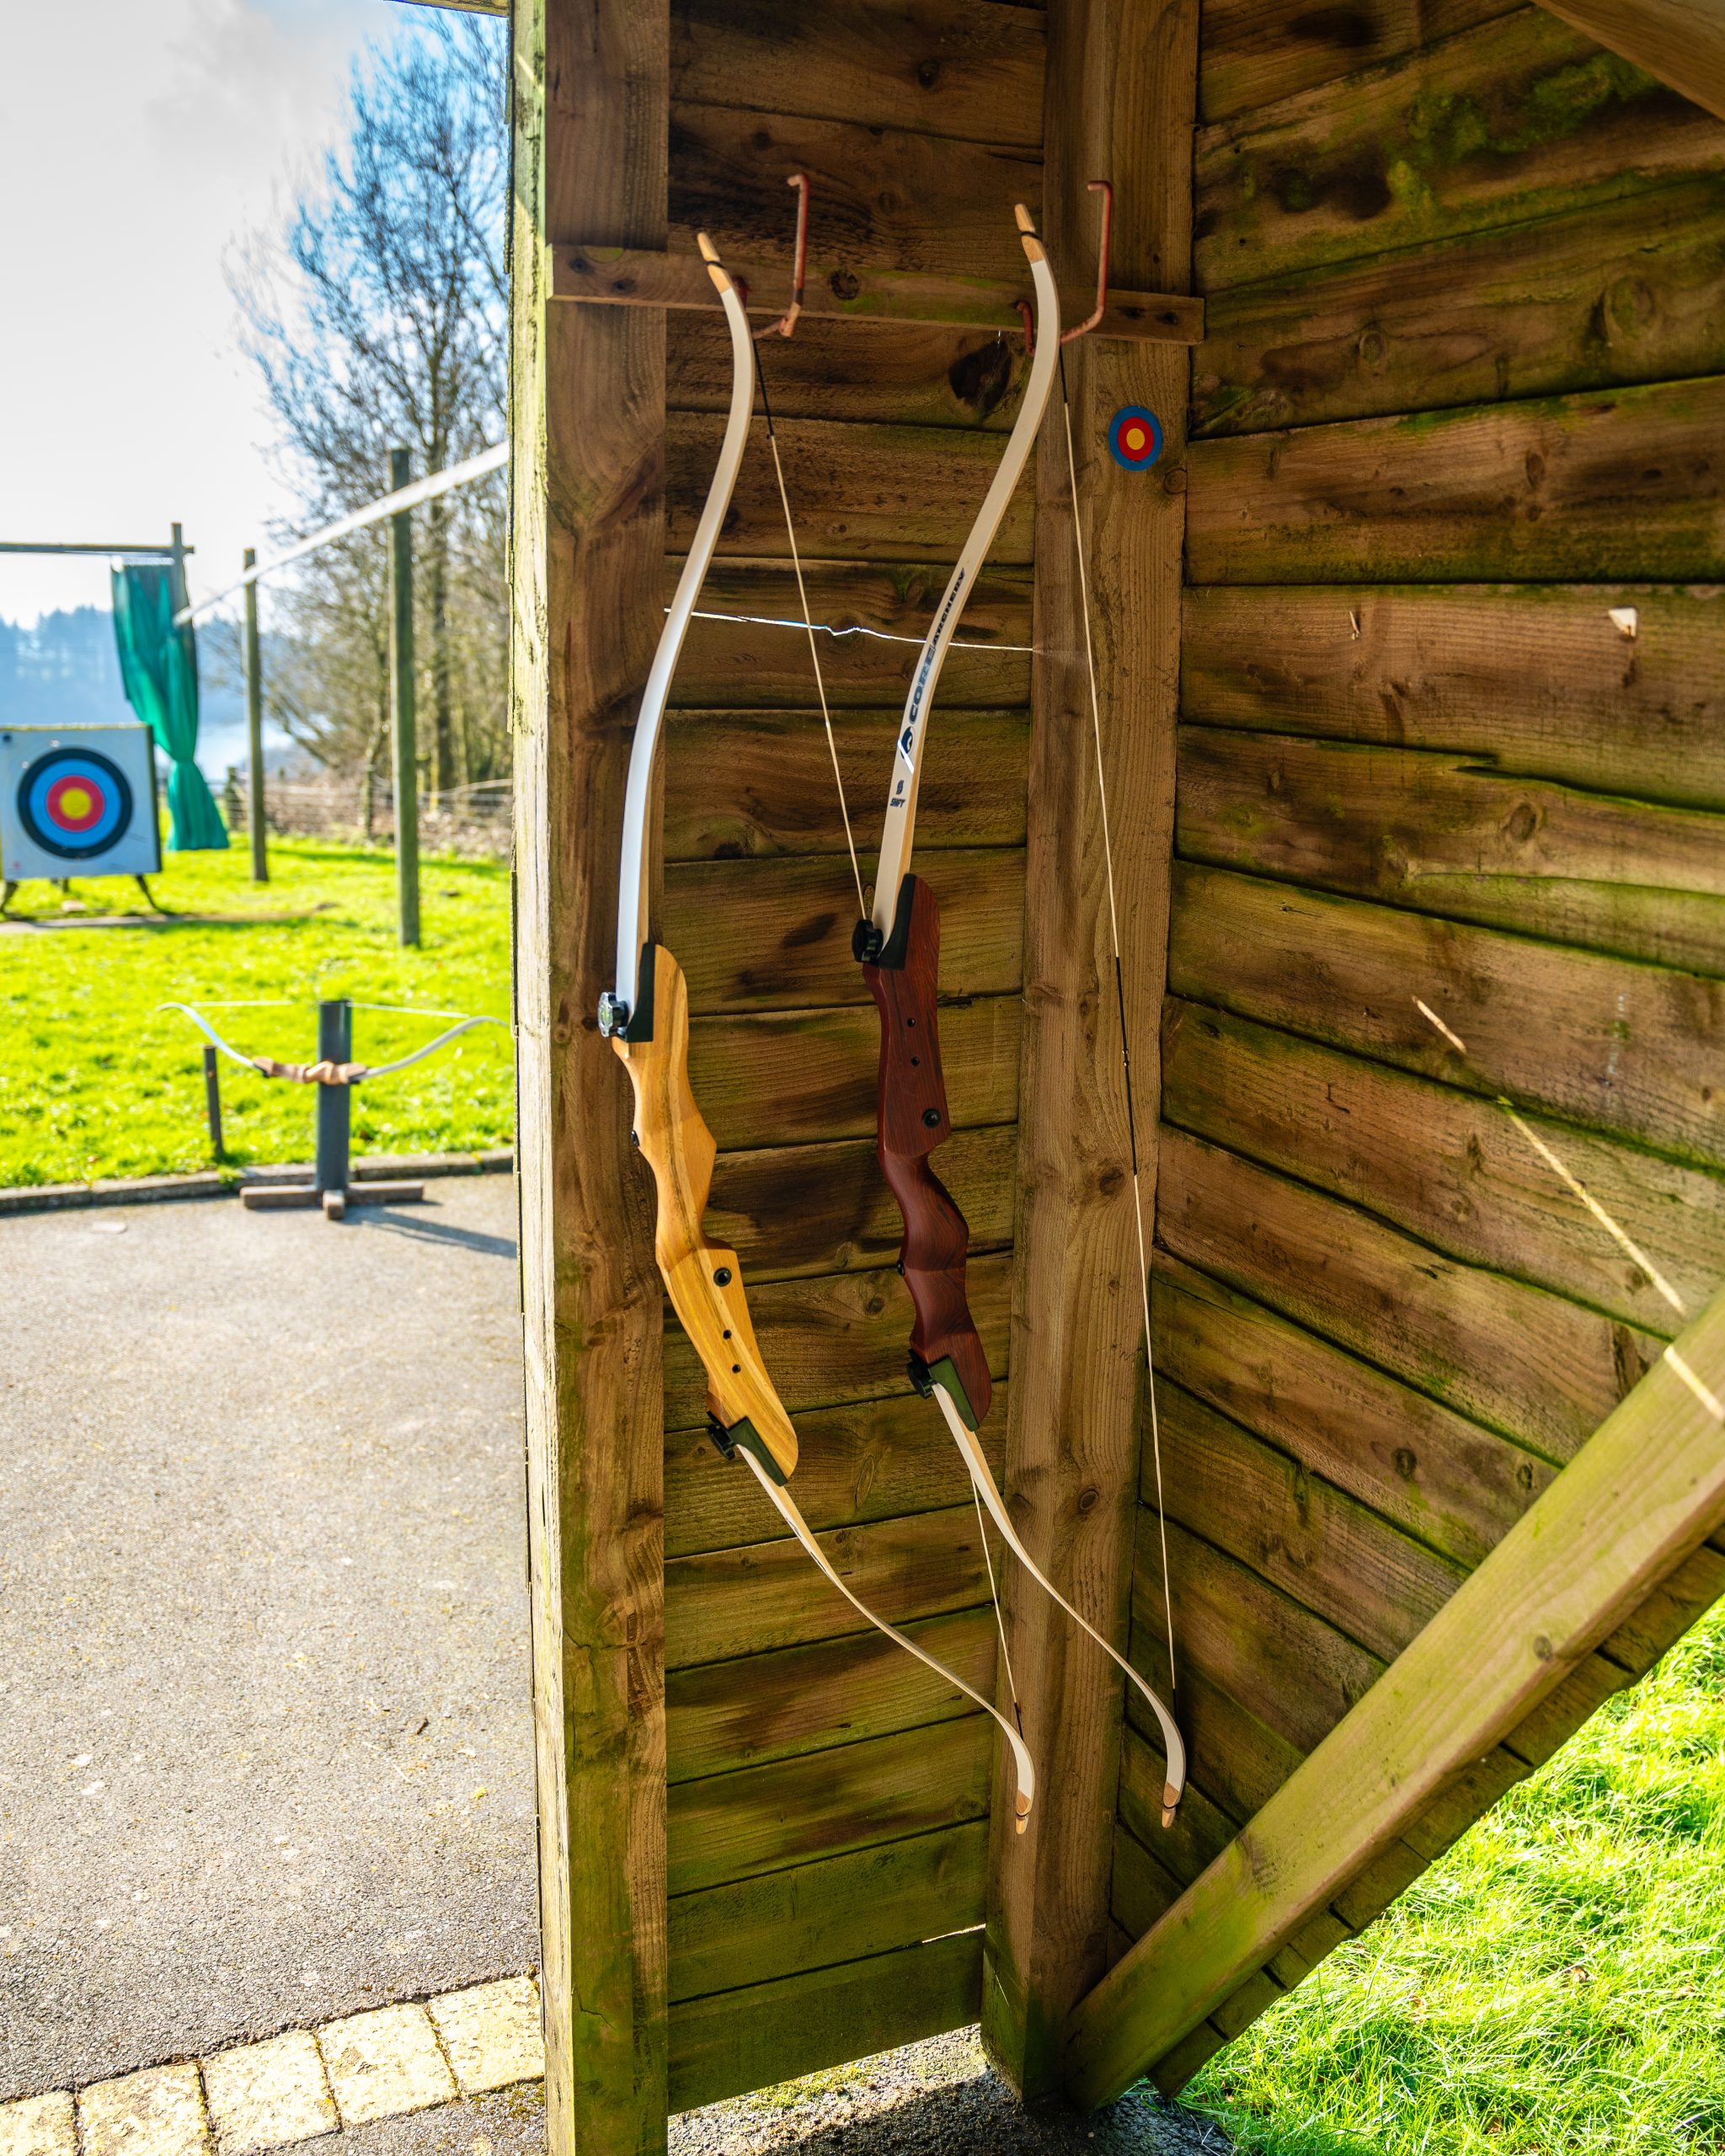 Two large bows with different handle colours are hanging on hooks inside a wood paneled shed. There is a target in the distance, with grass and a paved area behind the shed making up the archery range.